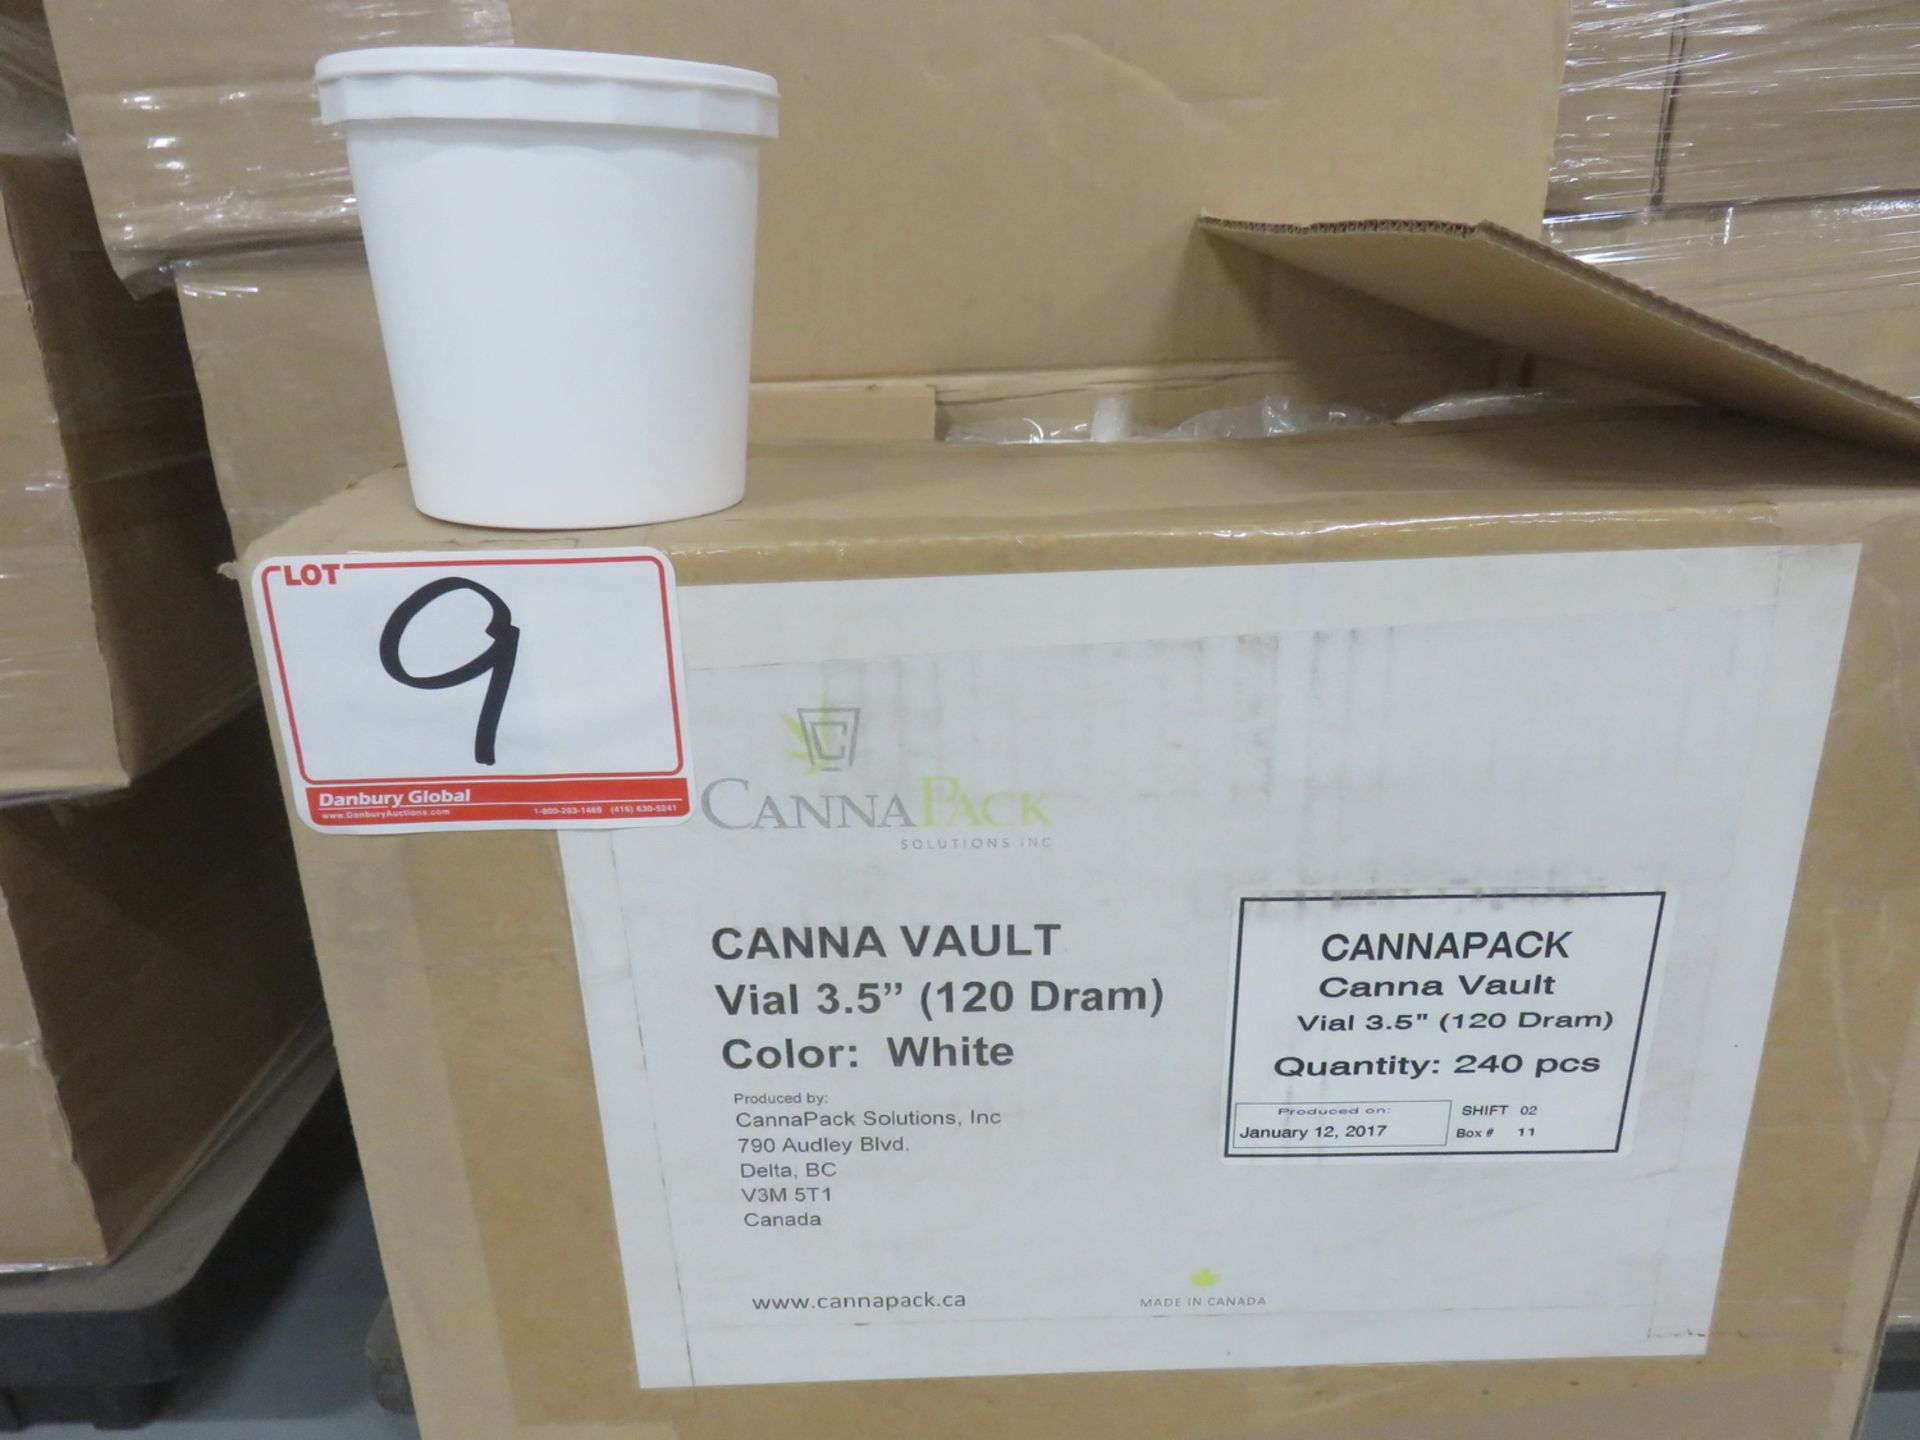 LOT - (33 BOXES) - CANNA PACK CANNA-VAULT VIAL 3.5" (120 DRAM) WHITE PLASTIC CANISTERS (240 PCS/BOX) - Image 3 of 4